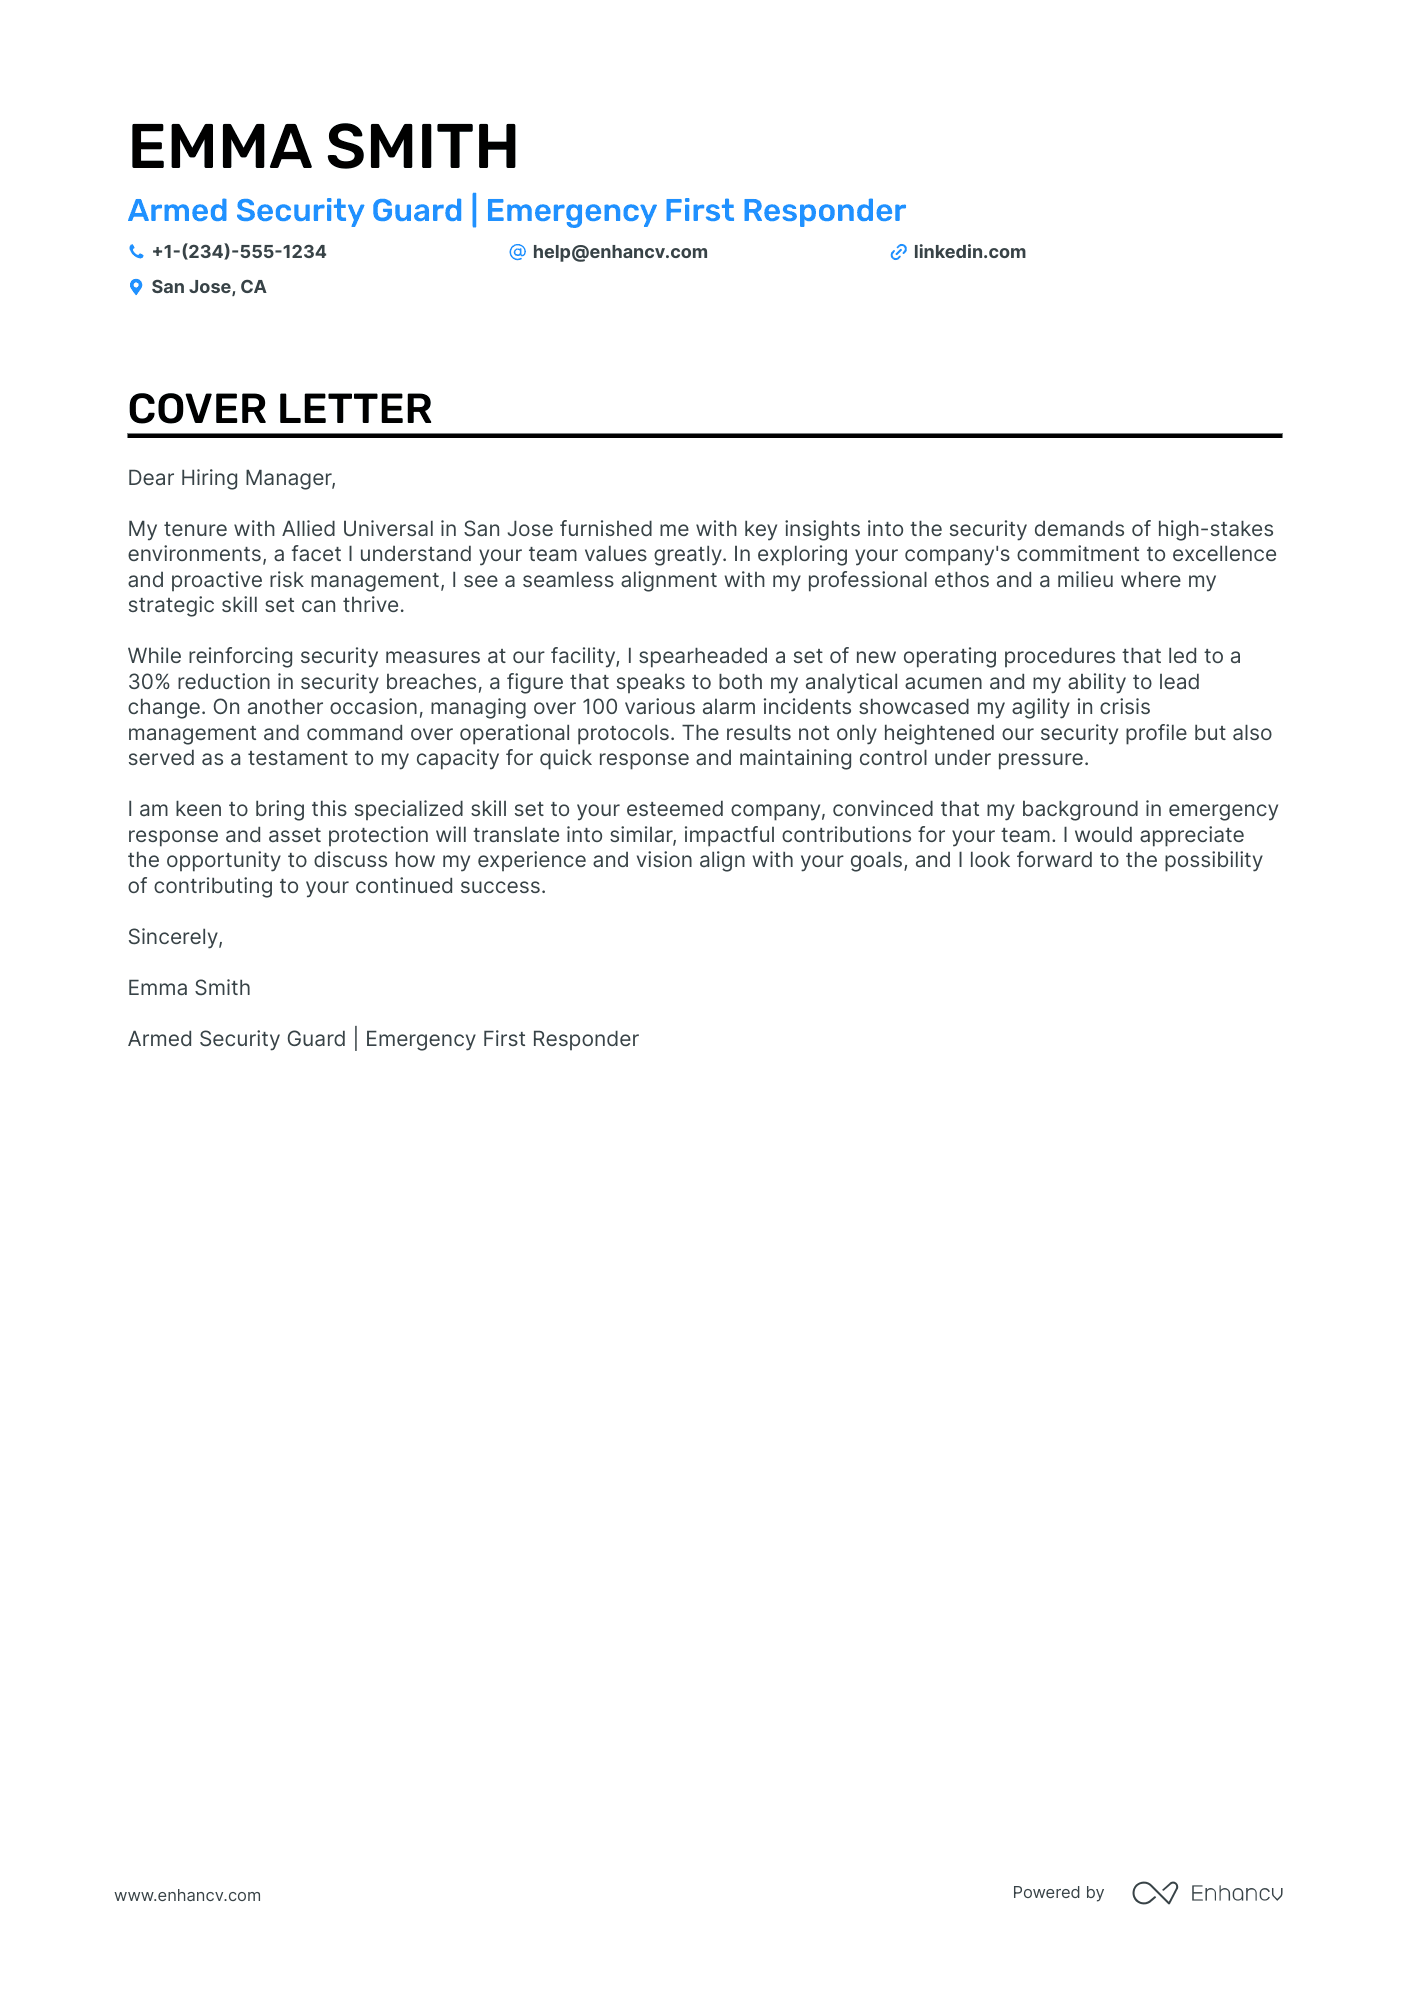 application letter to work as a security guard